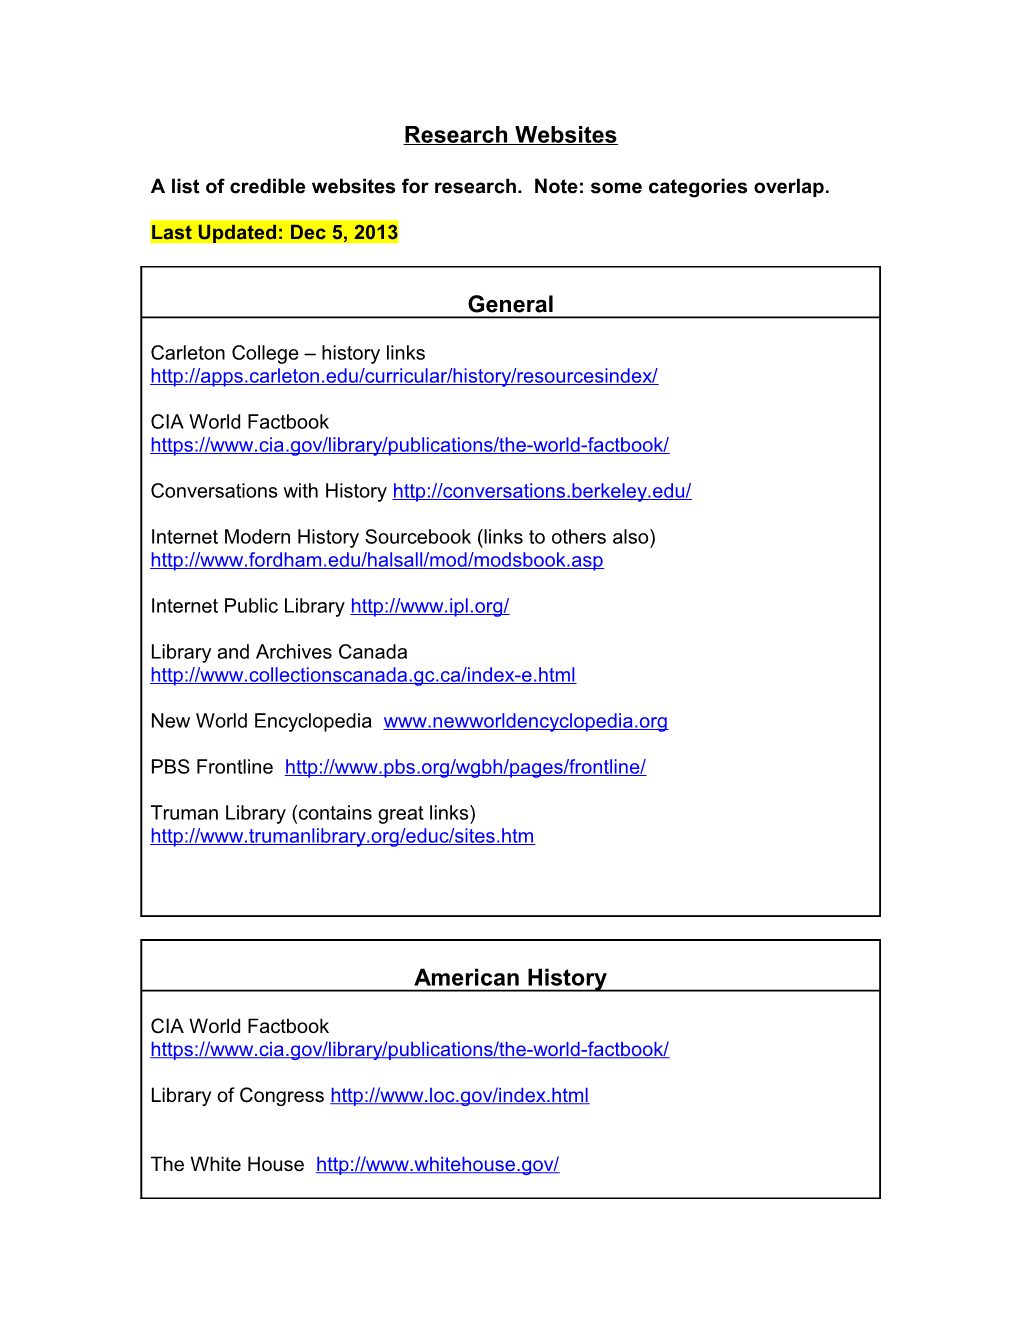 A List of Credible Websites for Research. Note: Some Categories Overlap